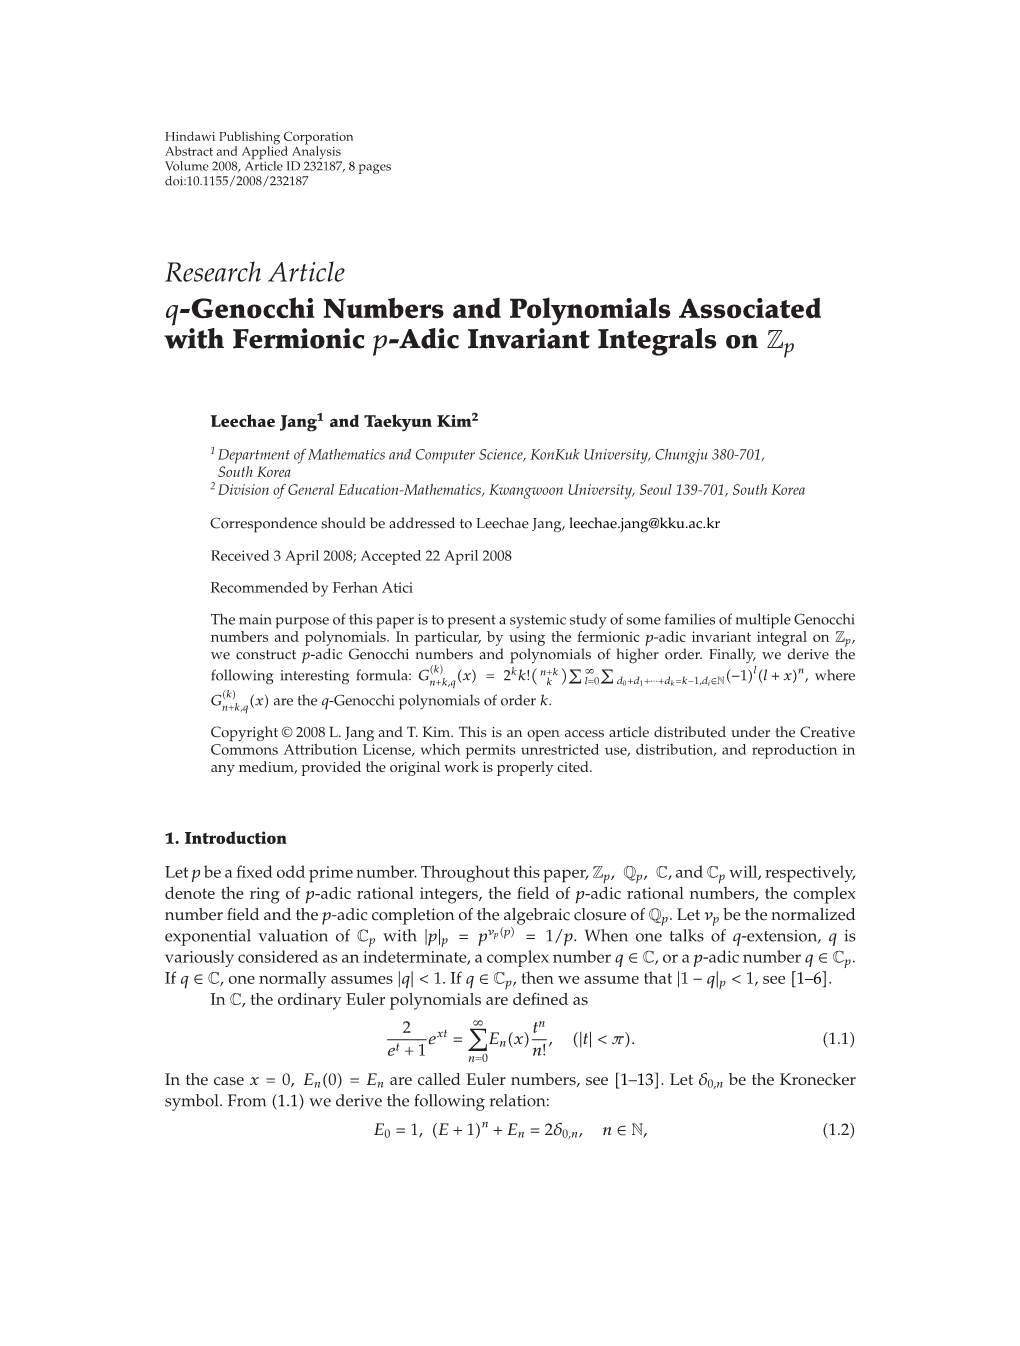 Q-Genocchi Numbers and Polynomials Associated with Fermionic P-Adic Invariant Integrals on Zp